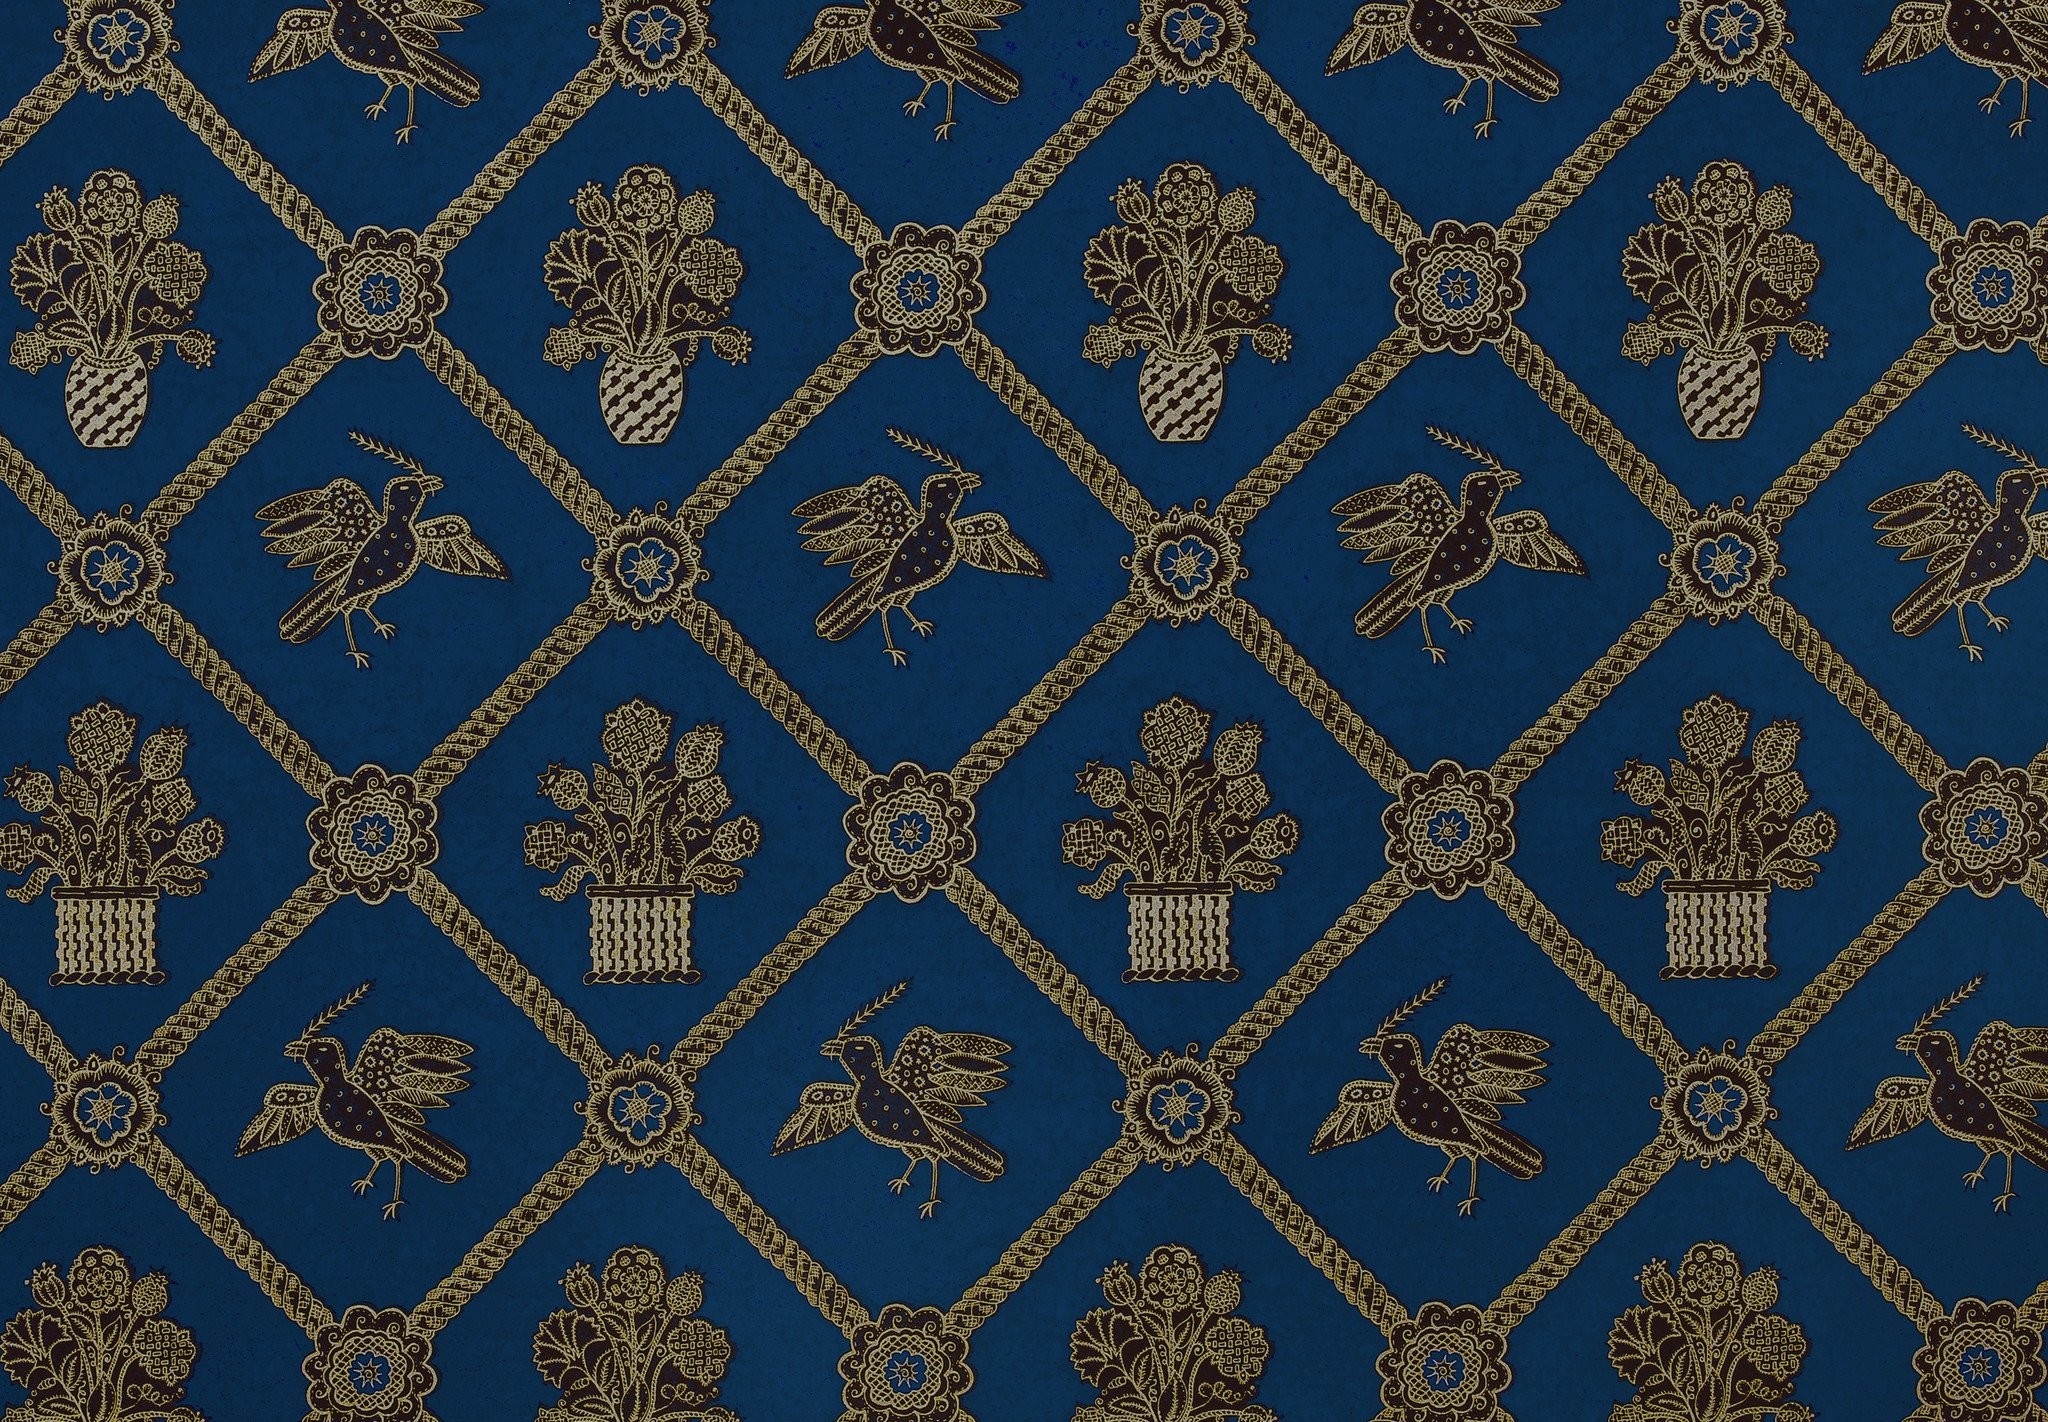 Royal Blue And Gold Wallpapers by Peter Day